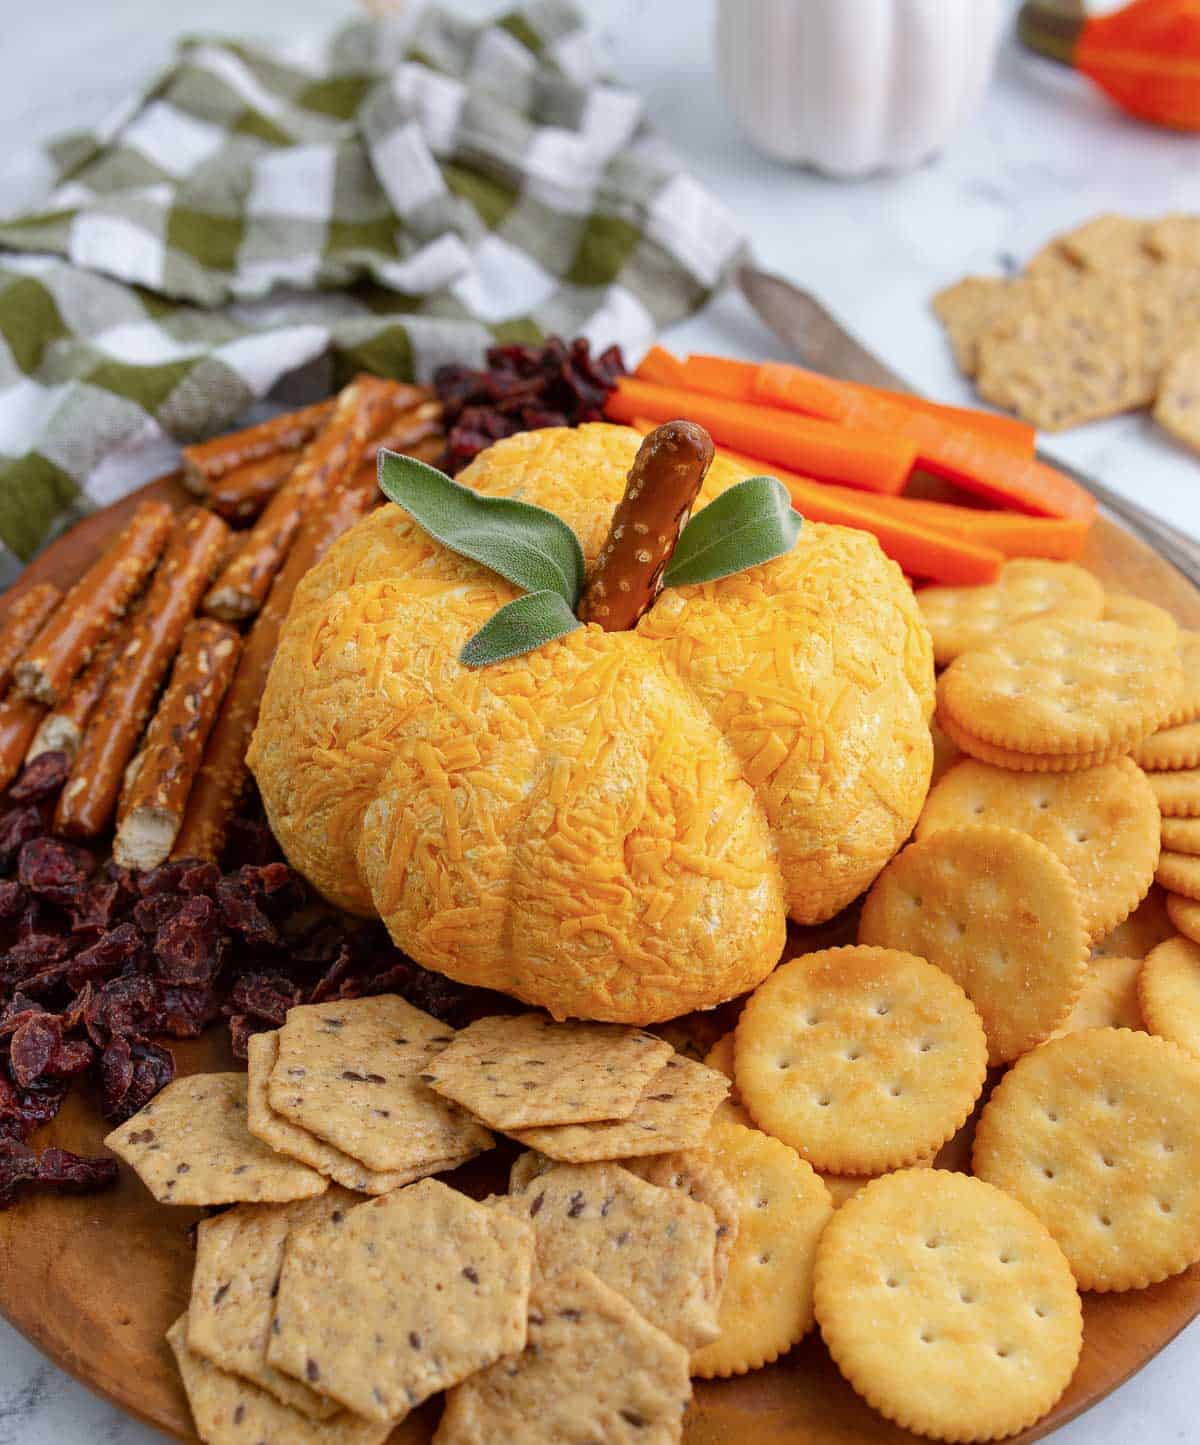 Pumpkin shaped cheese ball served with a plate of various crackers.